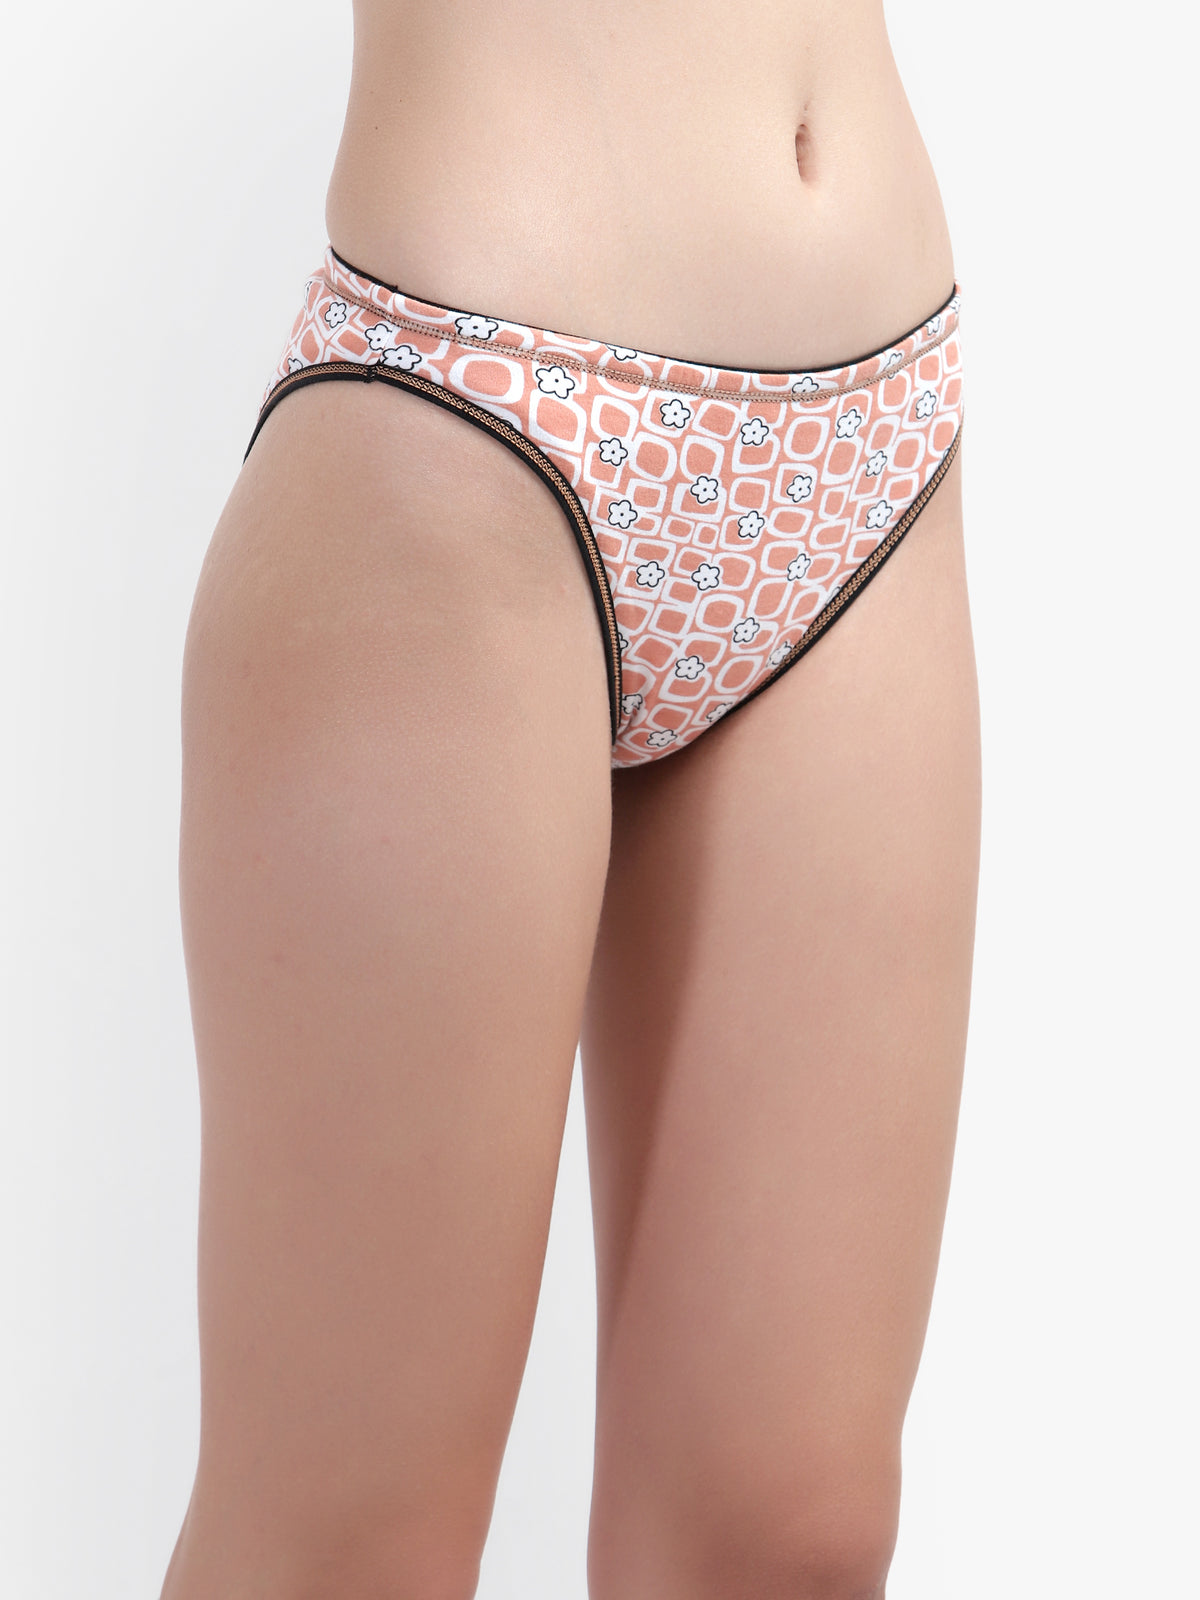 Pack of 3 Printed Cotton Women Panty